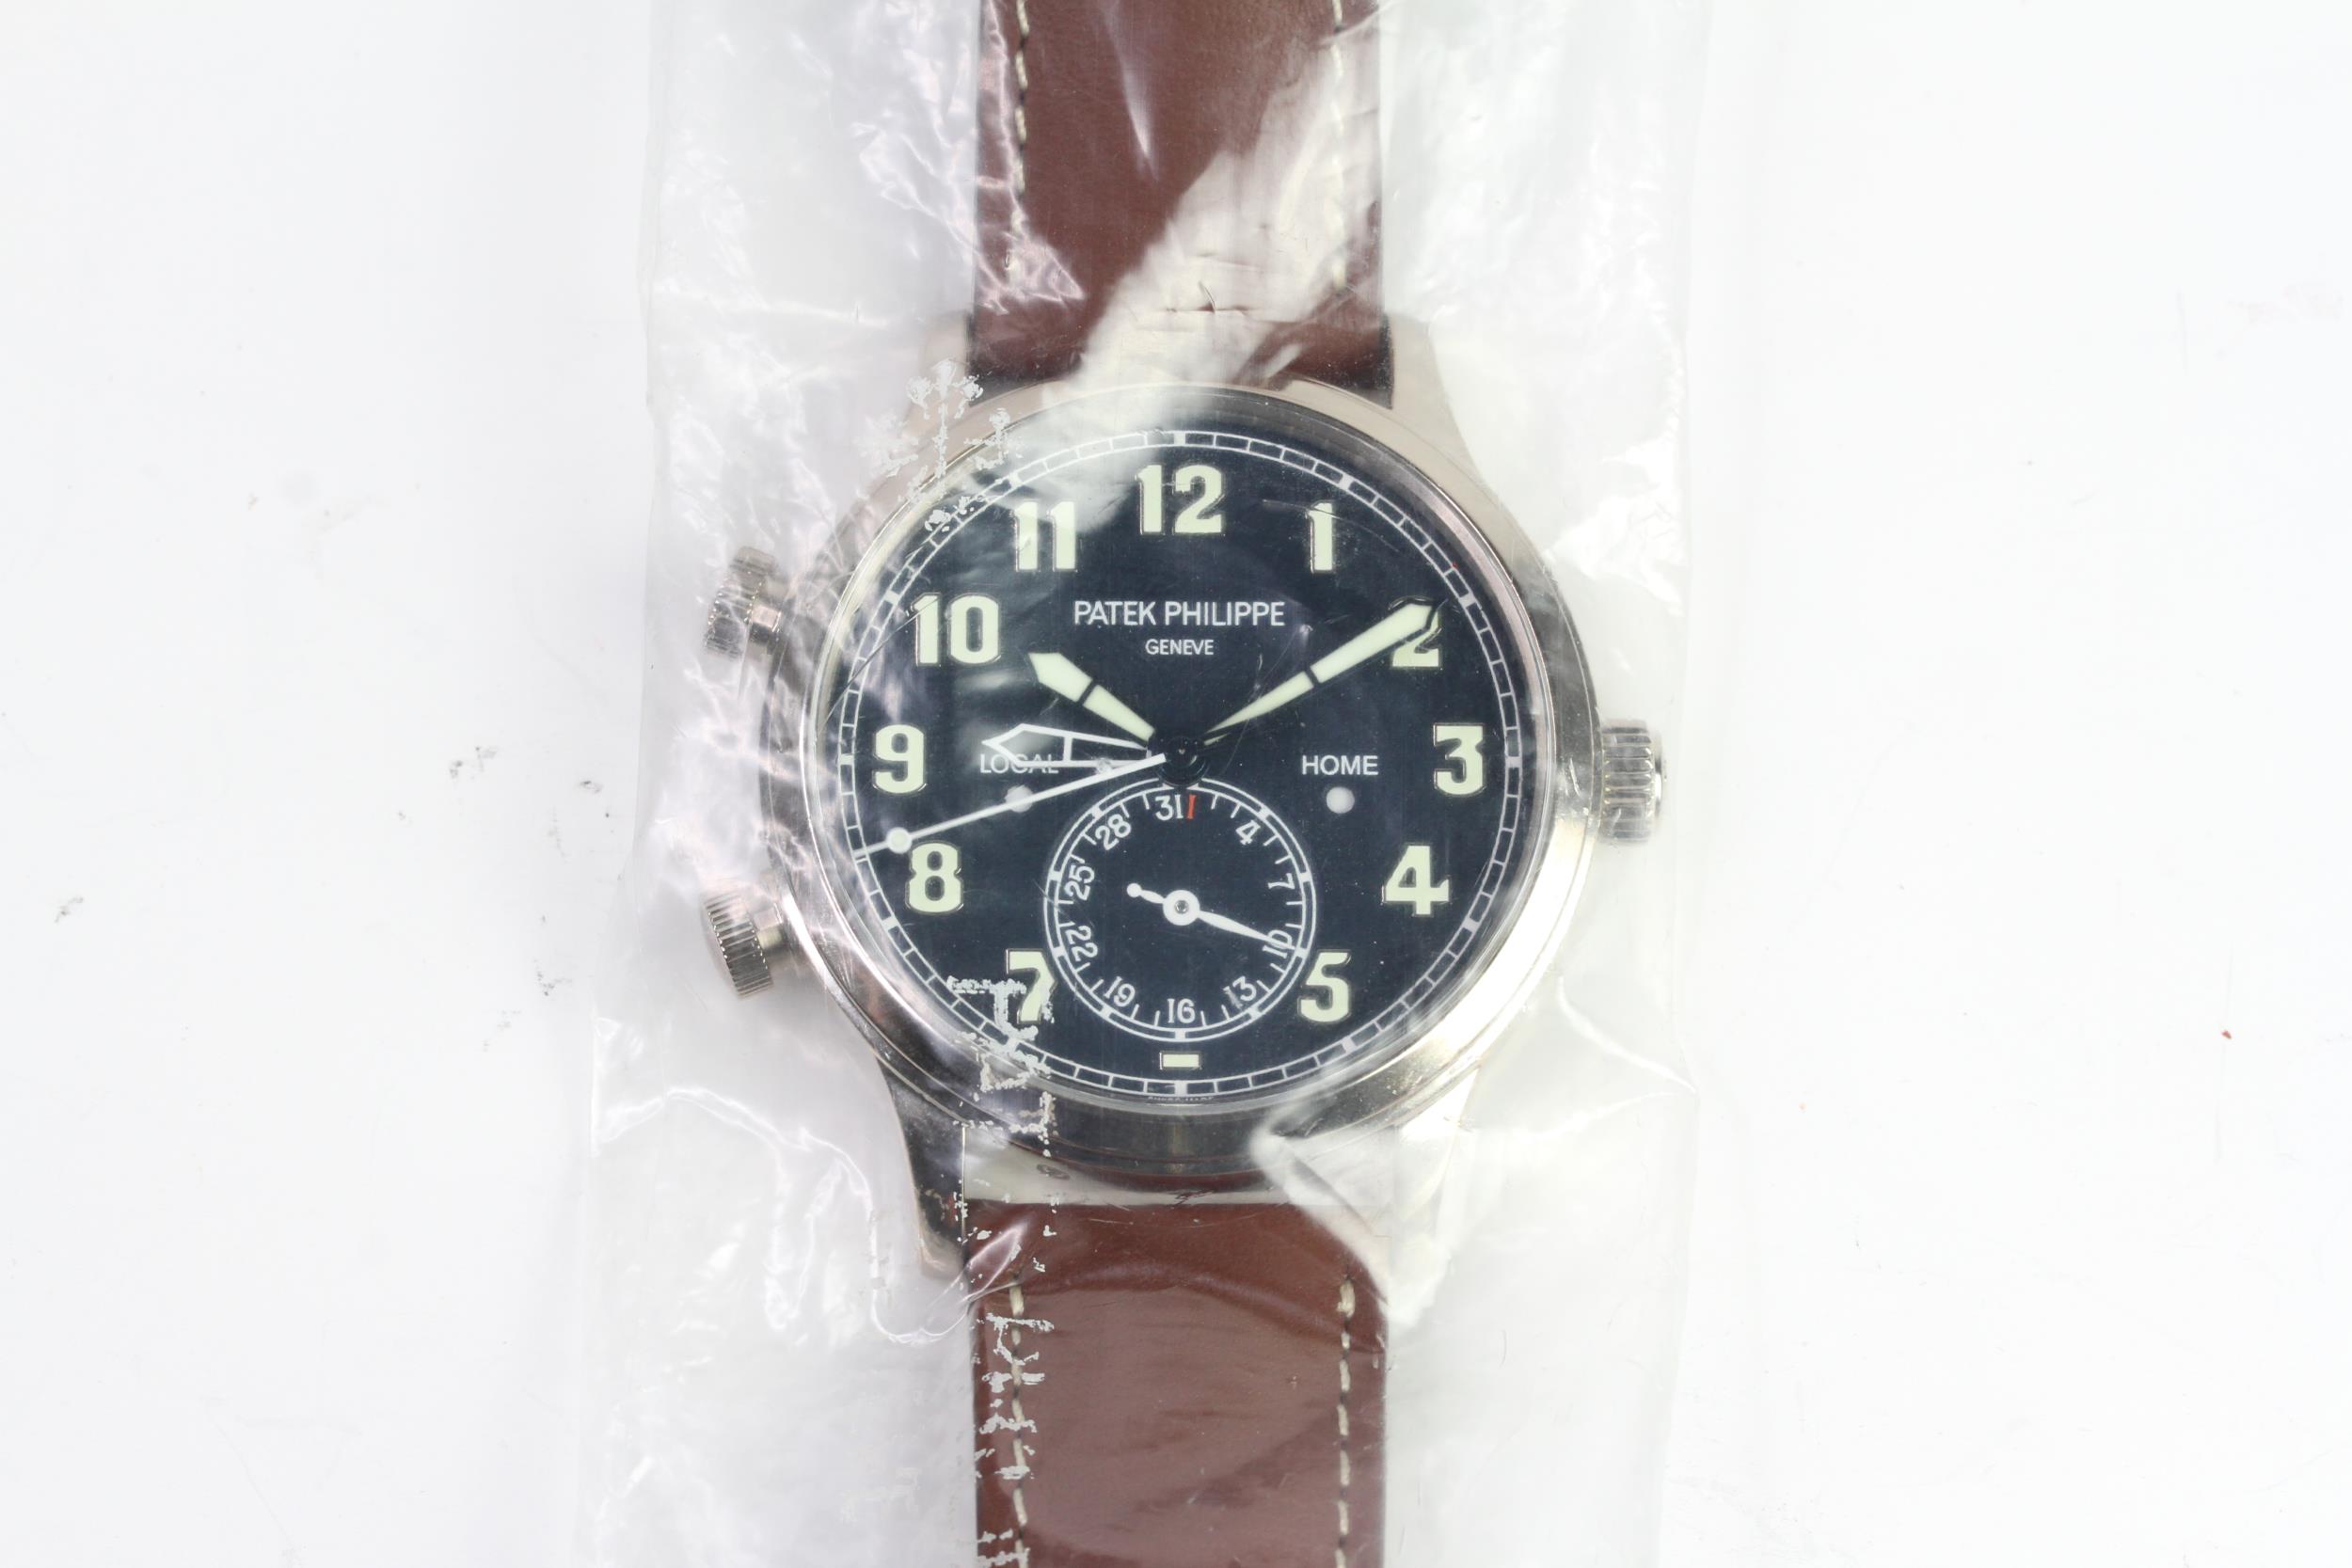 A FINE PATEK PHILIPPE CALATRAVA PILOT TRAVEL TIME REFERENCE 5224G-001, SEALED FROM SERVICE, WITH BOX - Image 7 of 19